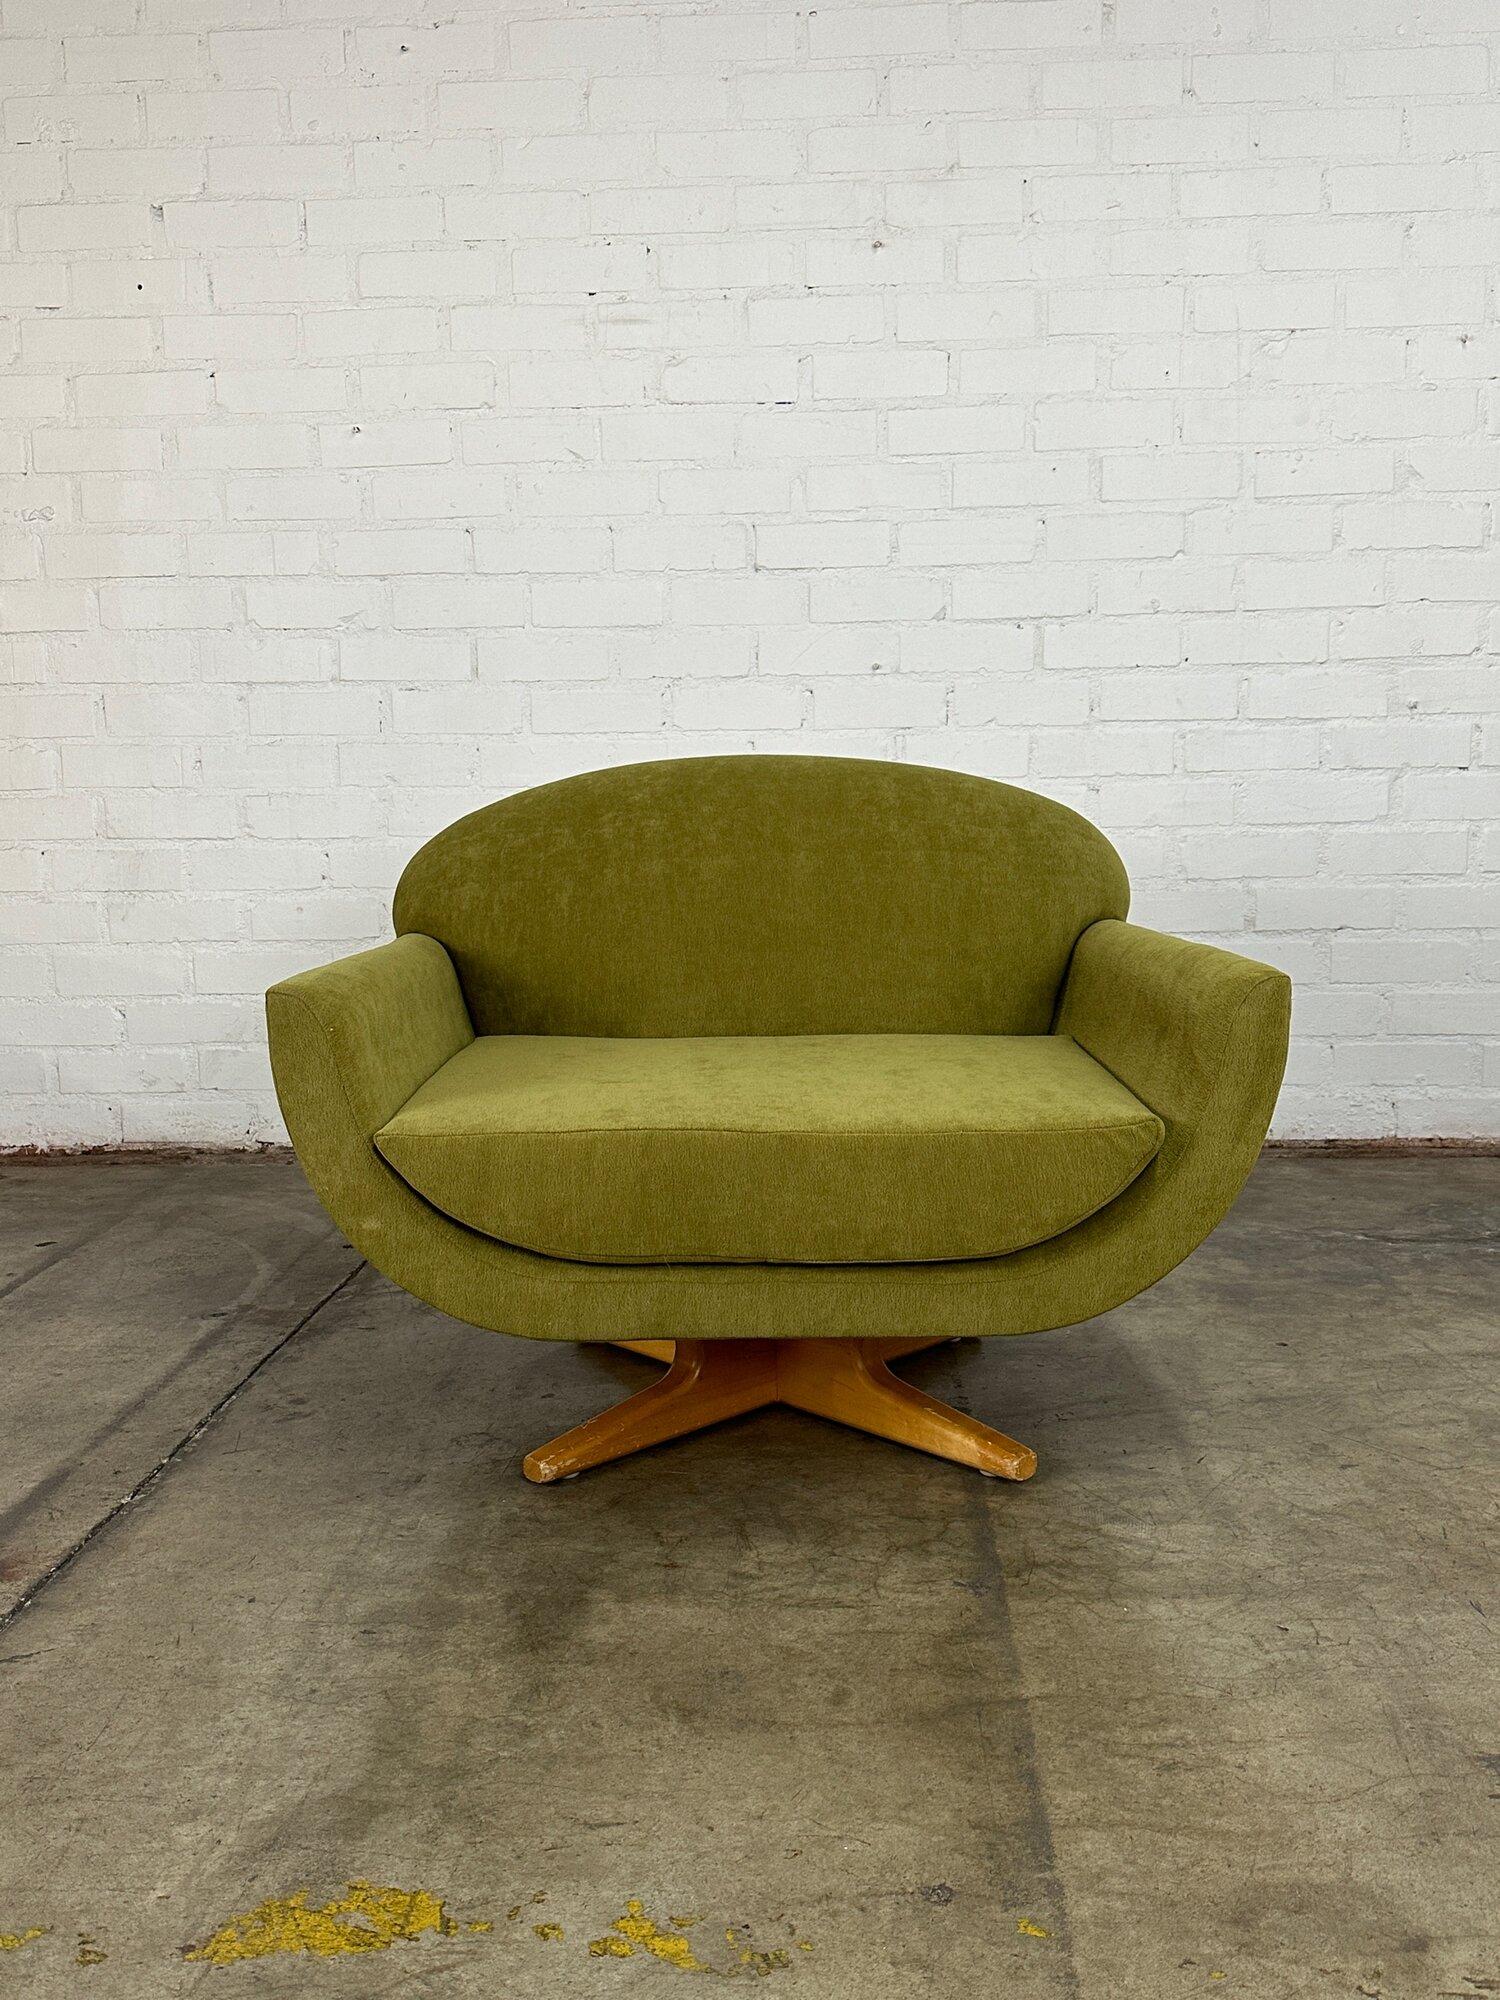 W40 D35 H29.5 SW31.5 SD23 SH17 AH22

Canoe Swivel Chair by In House Furniture newly upholstered in Posion Apple green Chenille. Chair sits on a maple star shaped pedestal. There is some scuffs on the base that have been pictured closely